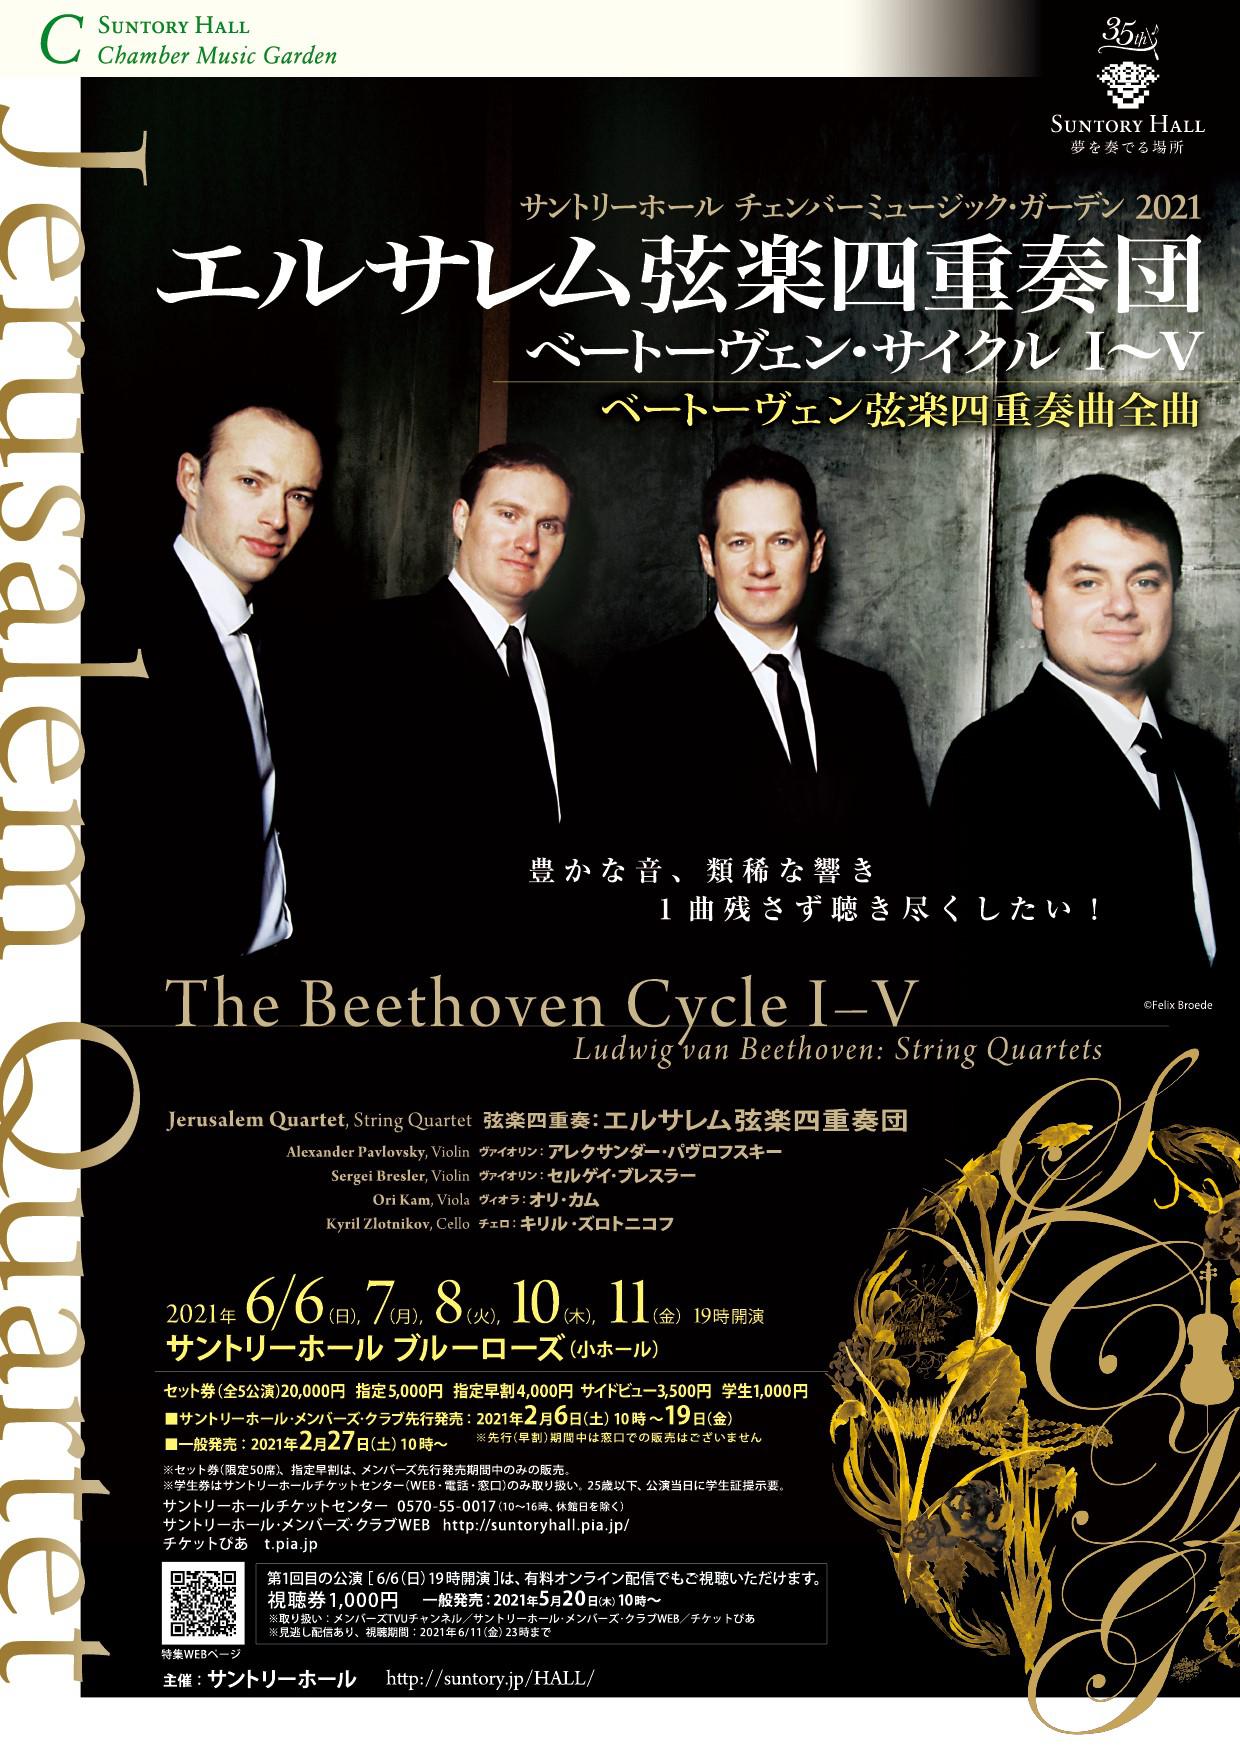 Jerusalem Quartet - The Beethoven Cycle Ⅱ Performance Schedule